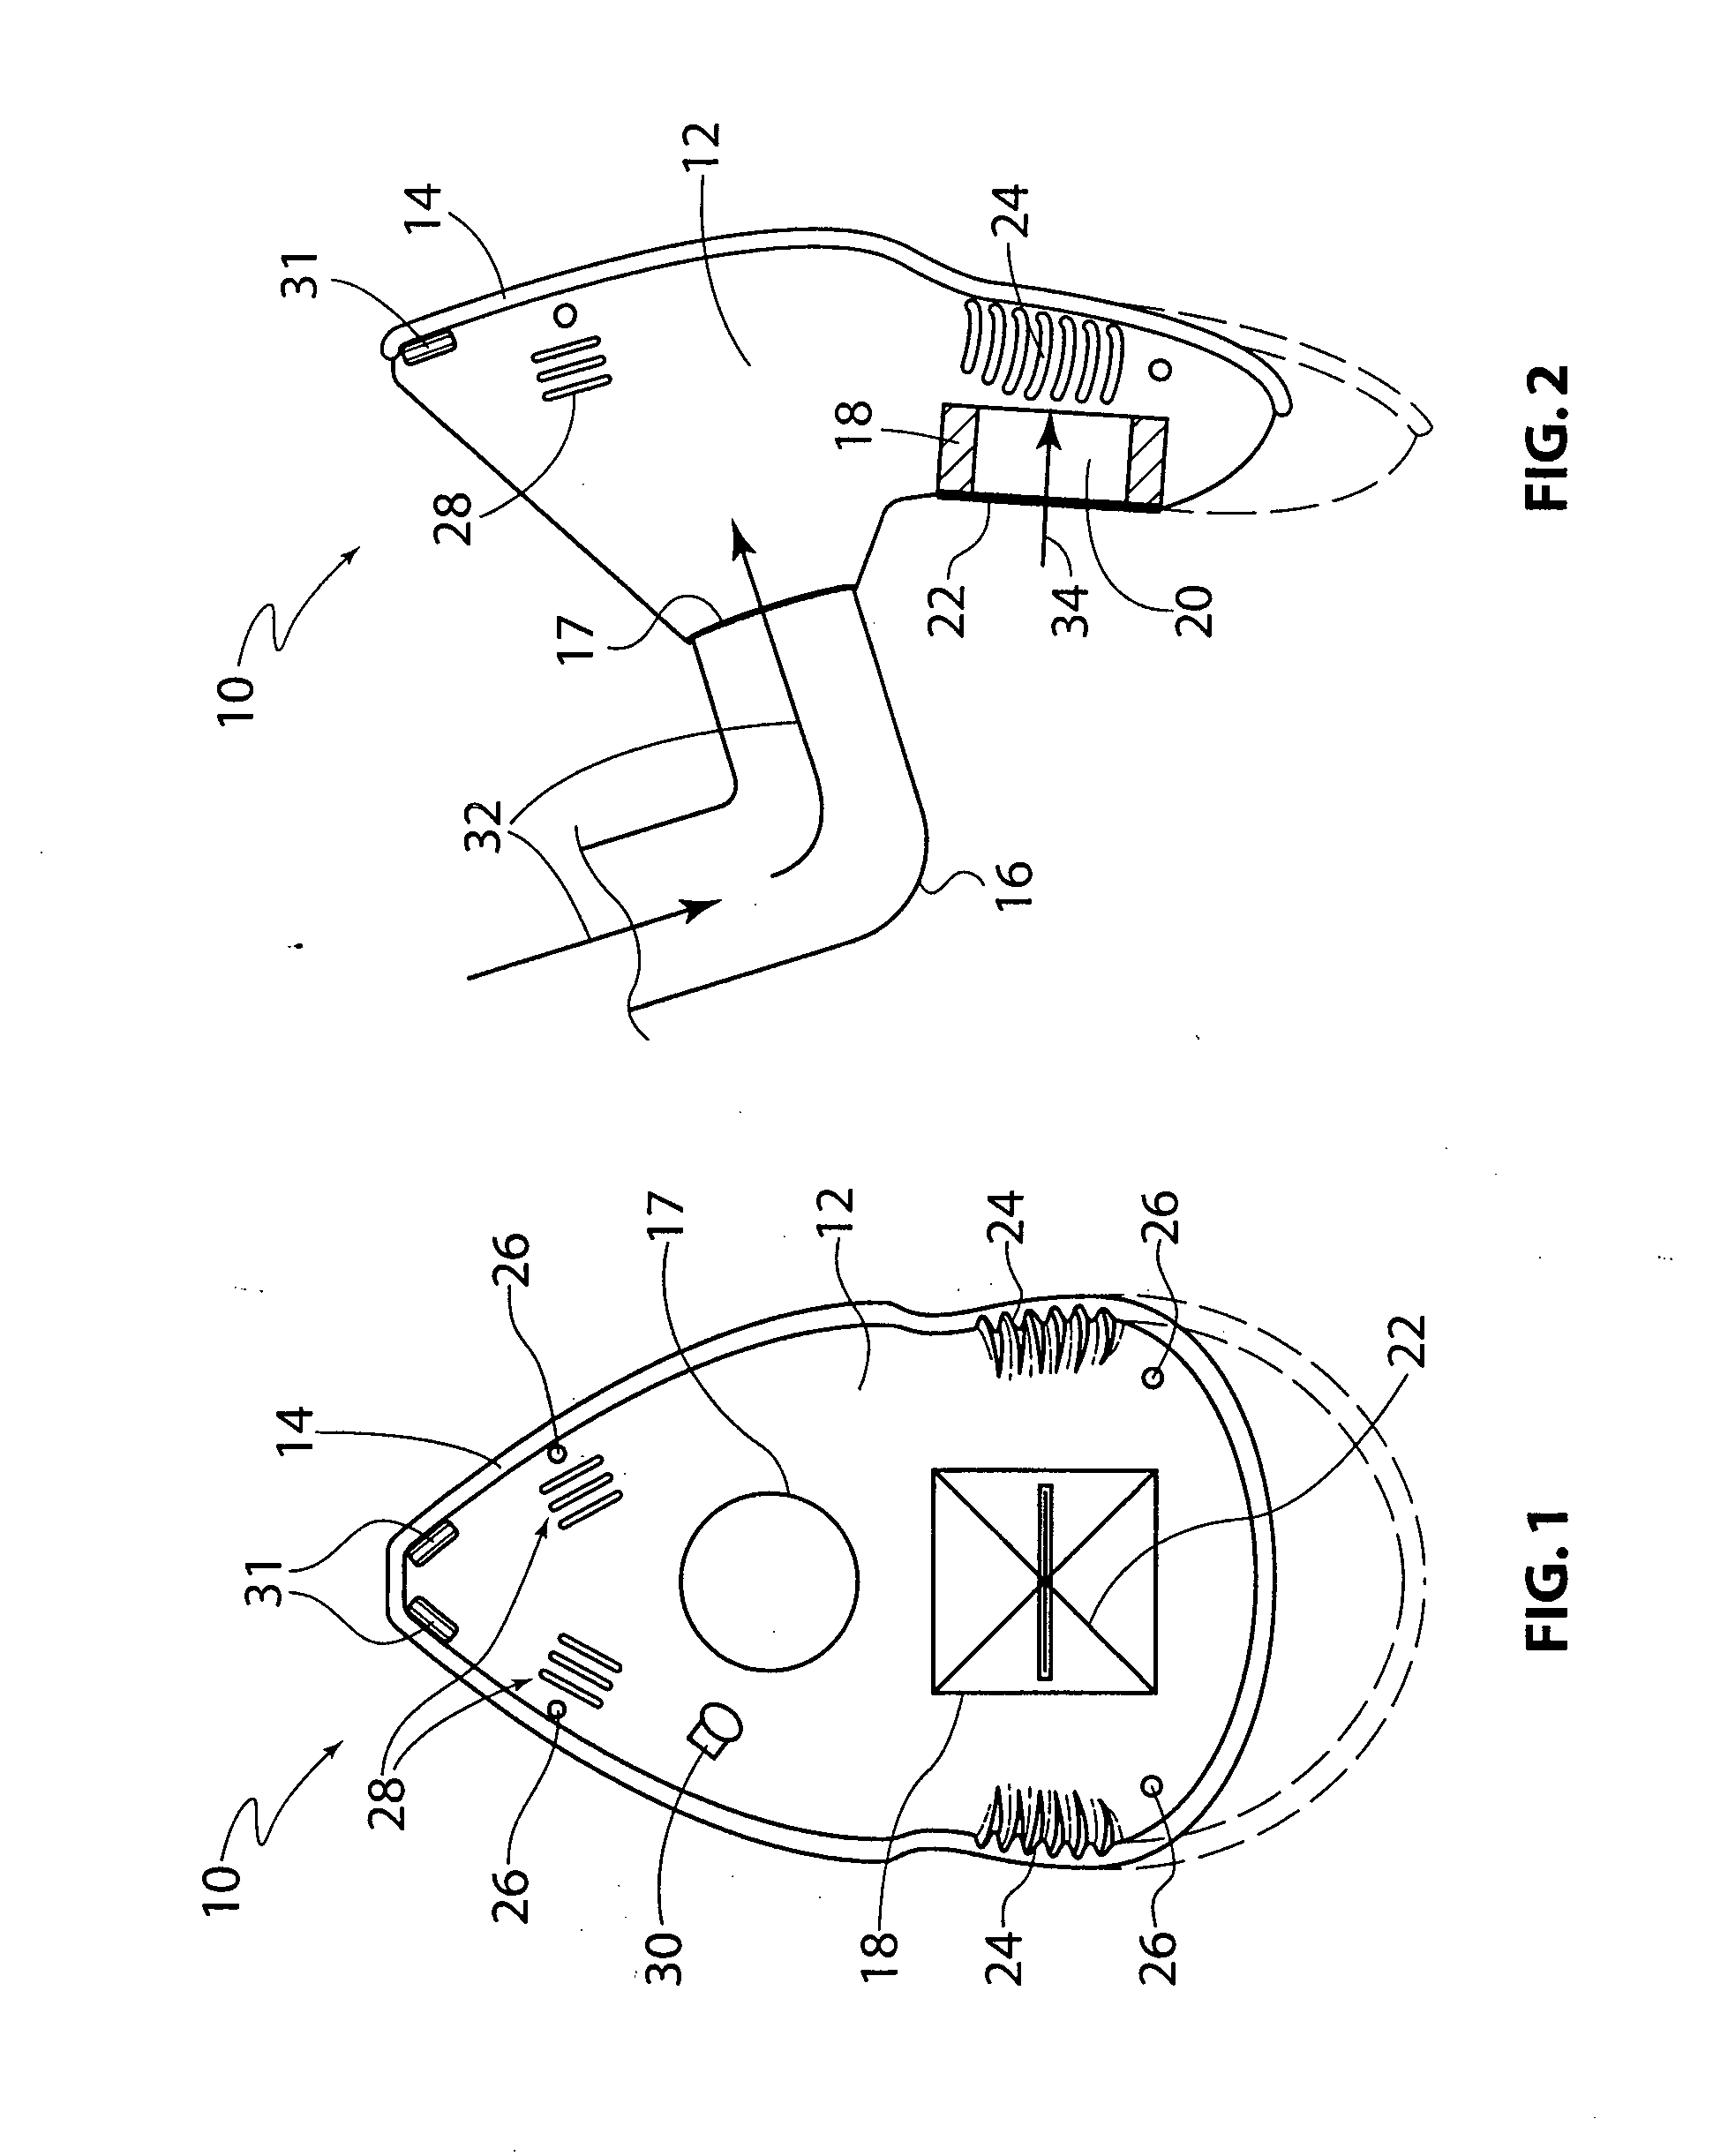 Mask for use with a patient undergoing a sedated endoscopic procedure